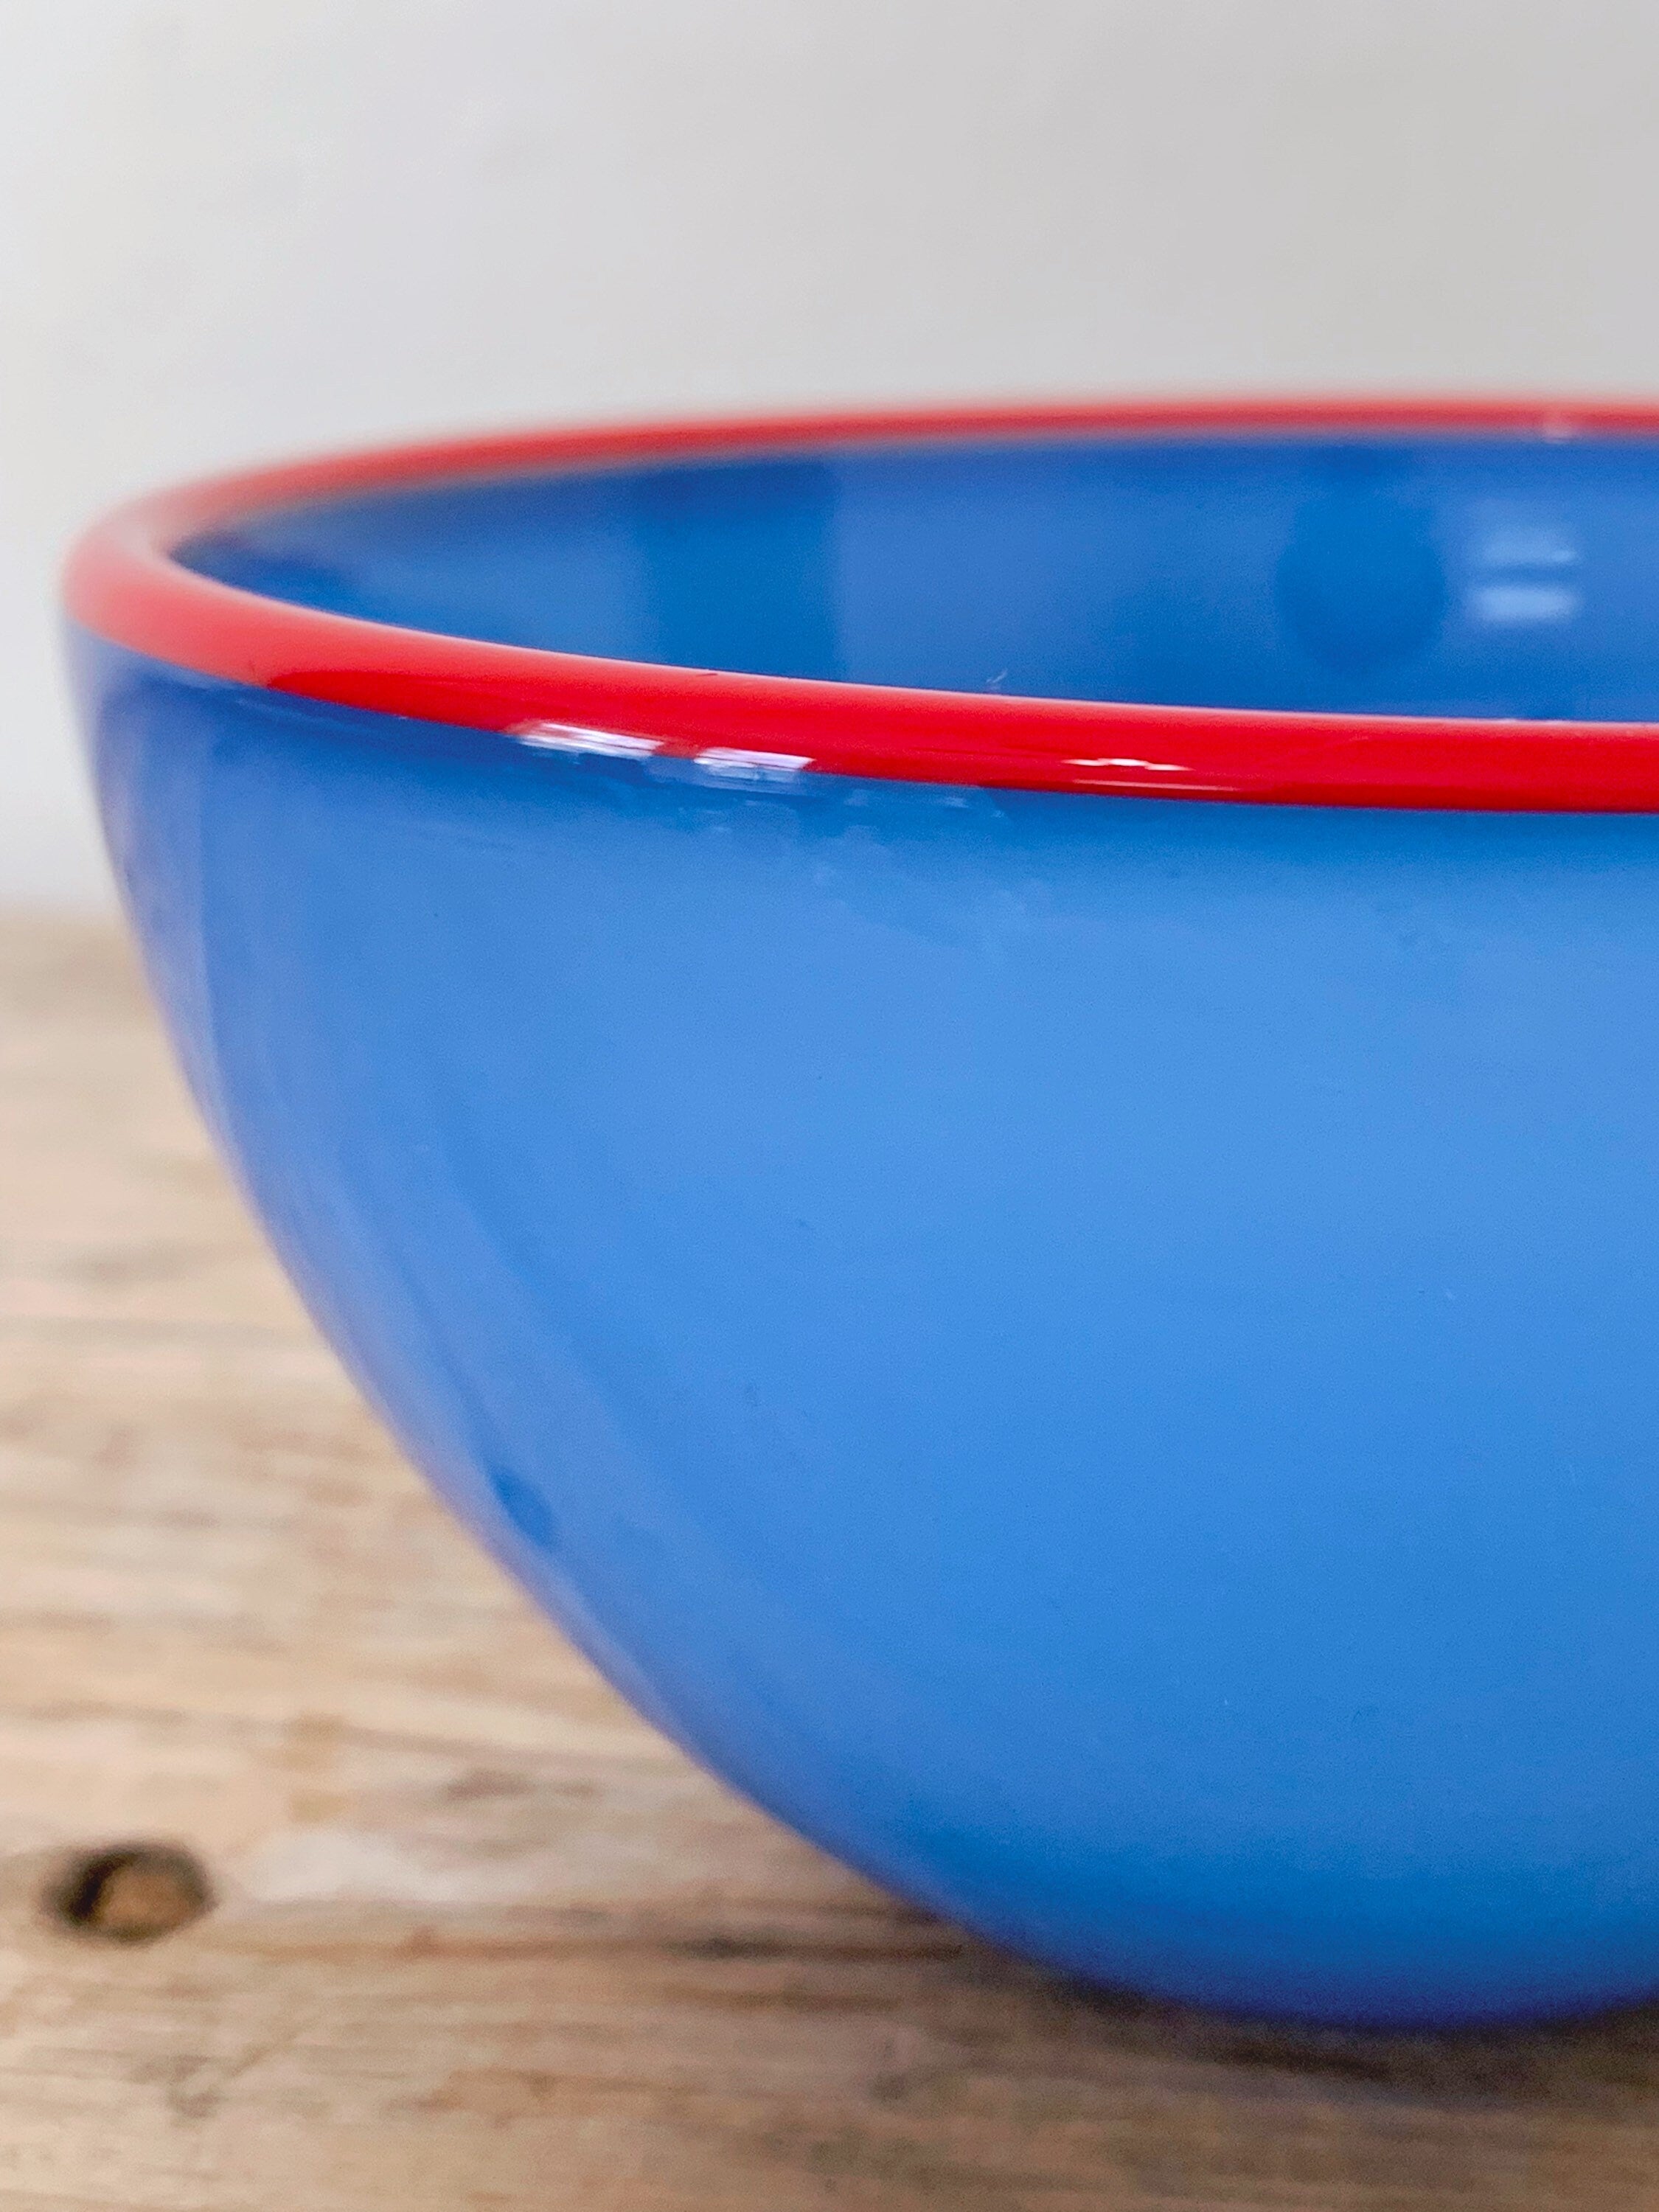 Vintage Studio Art Glass Bowl in Blue with Red Rim | Hand Made Candy Bowl Nut Bowl | Modern Decorative Art